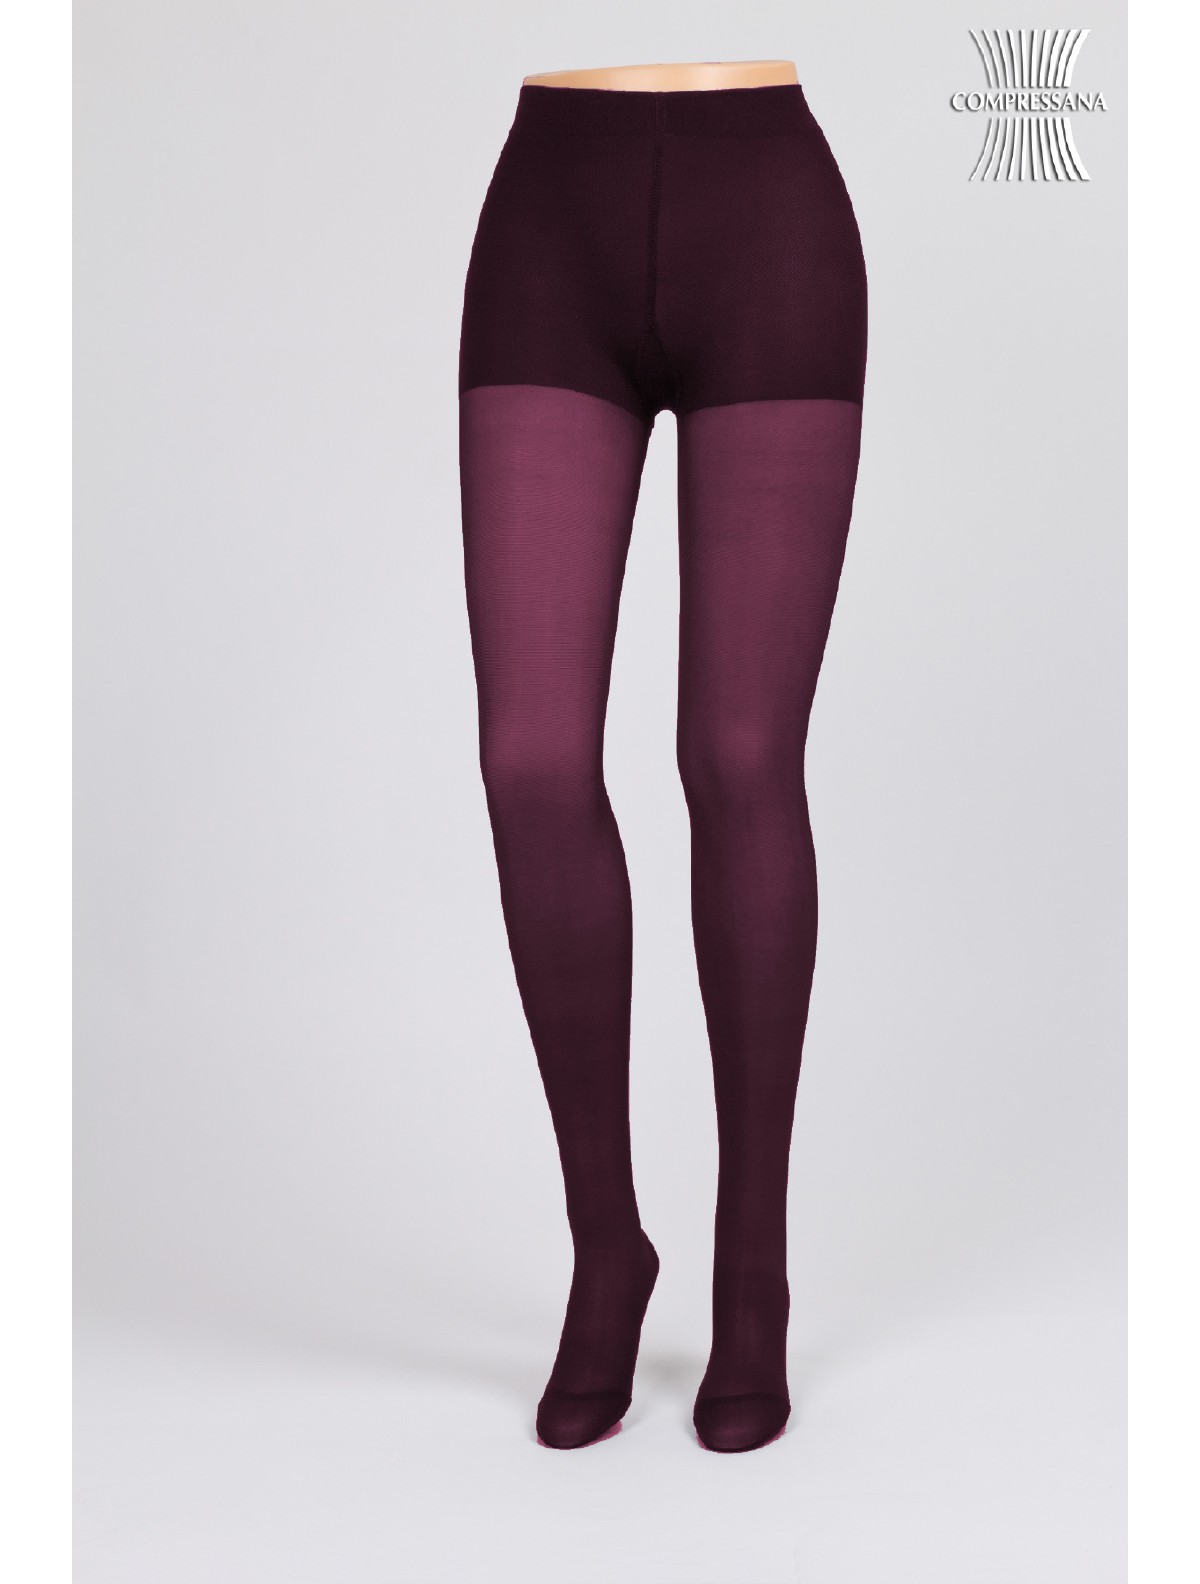 Compressana Calypso Support Strong Tights 140